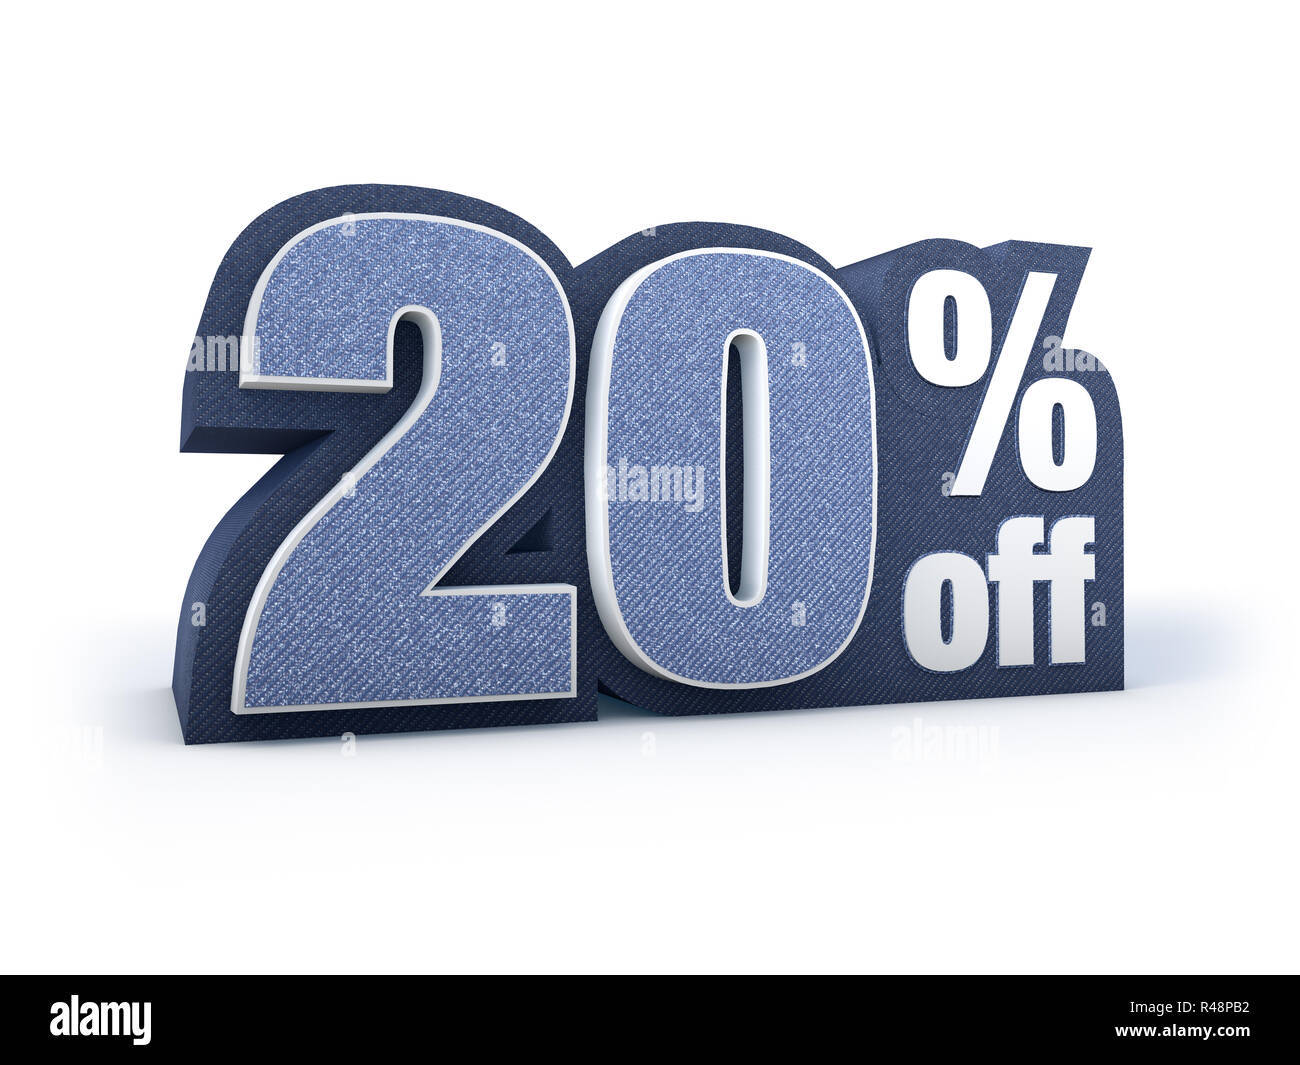 20 percent off denim styled discount price sign Stock Photo